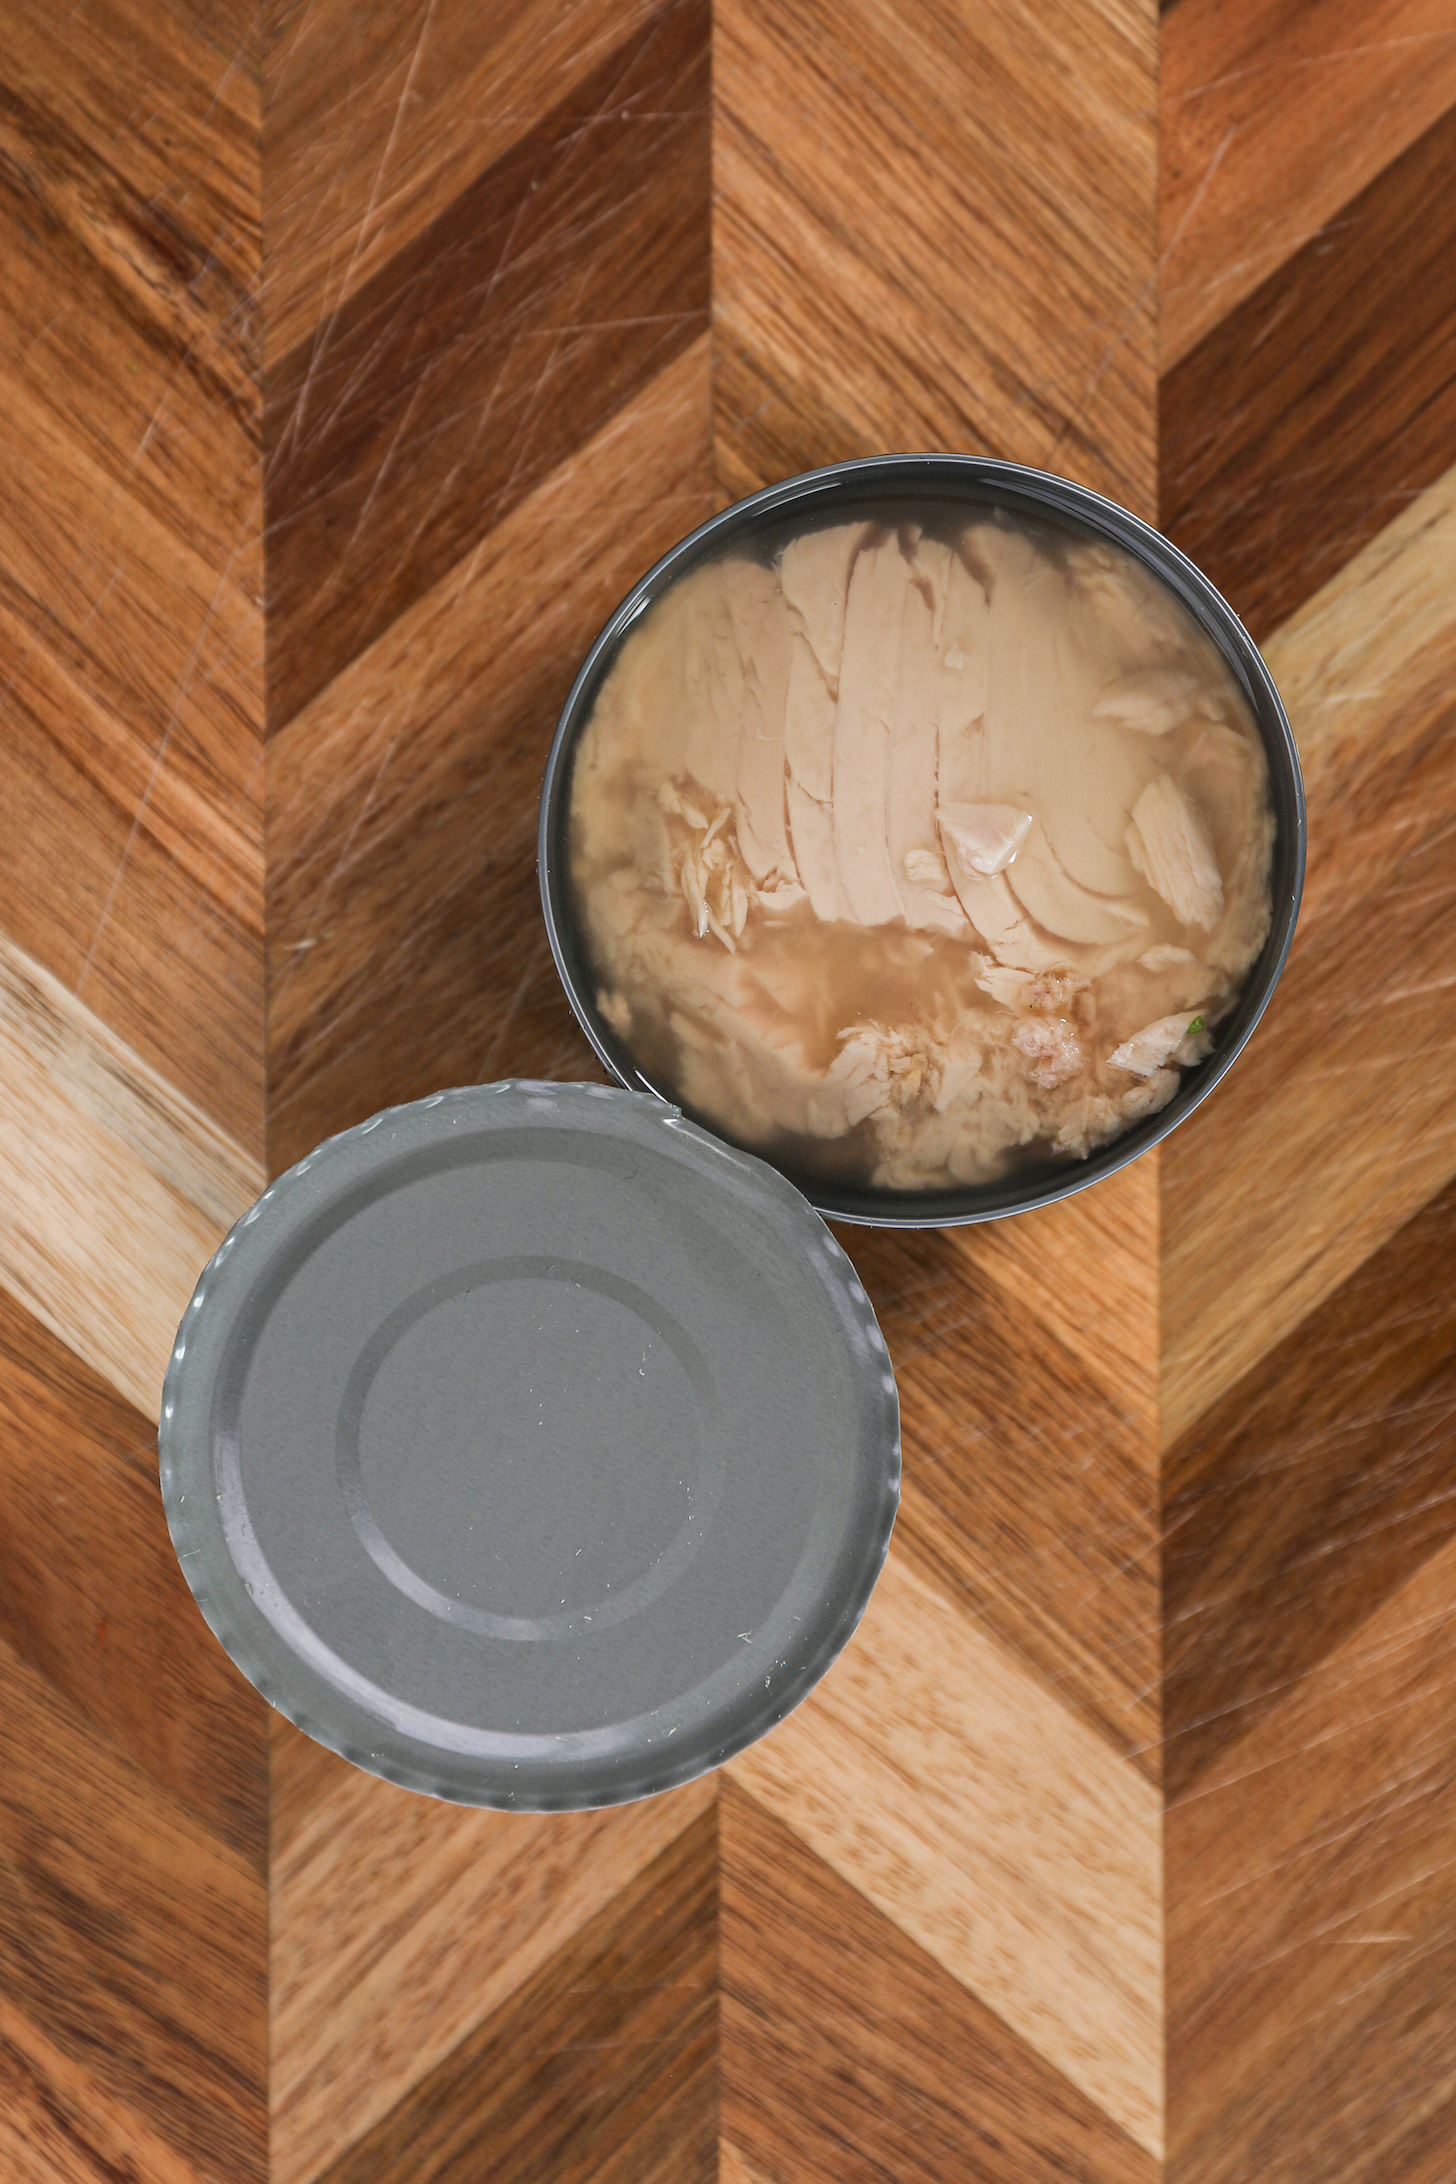 A open can of tuna fish in water on a wooden board.